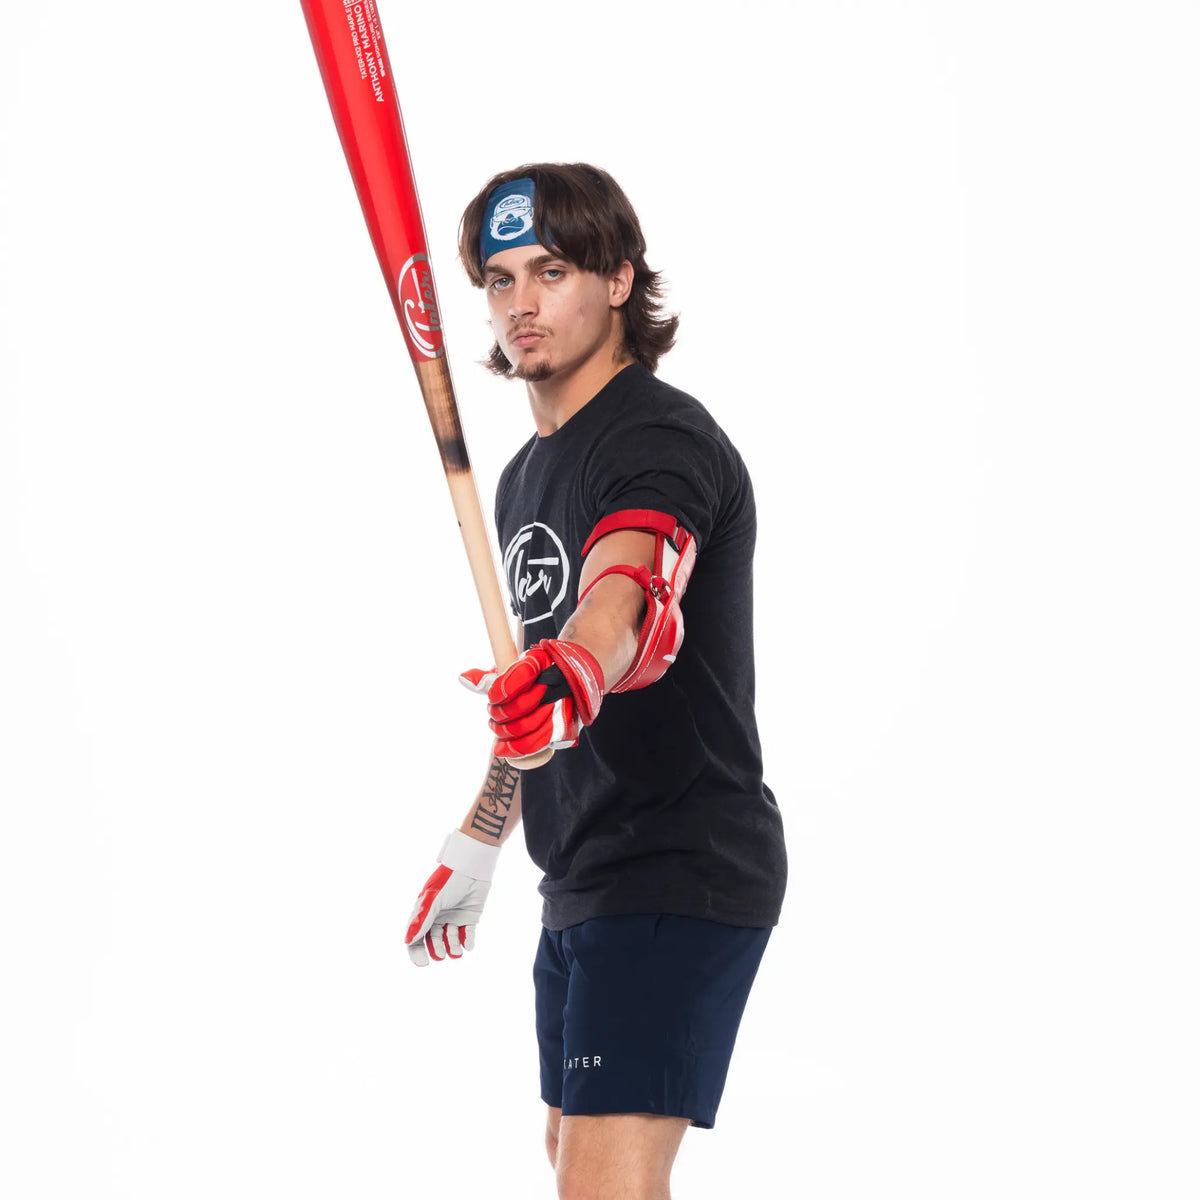 The image features a baseball player posed with a bat over his shoulder. He is wearing a black T-shirt with the Tater Baseball logo, navy workout shorts also branded with the Tater logo, and red-and-white batting gloves. The outfit is a sporty, cohesive look suitable for baseball training and casual wear.